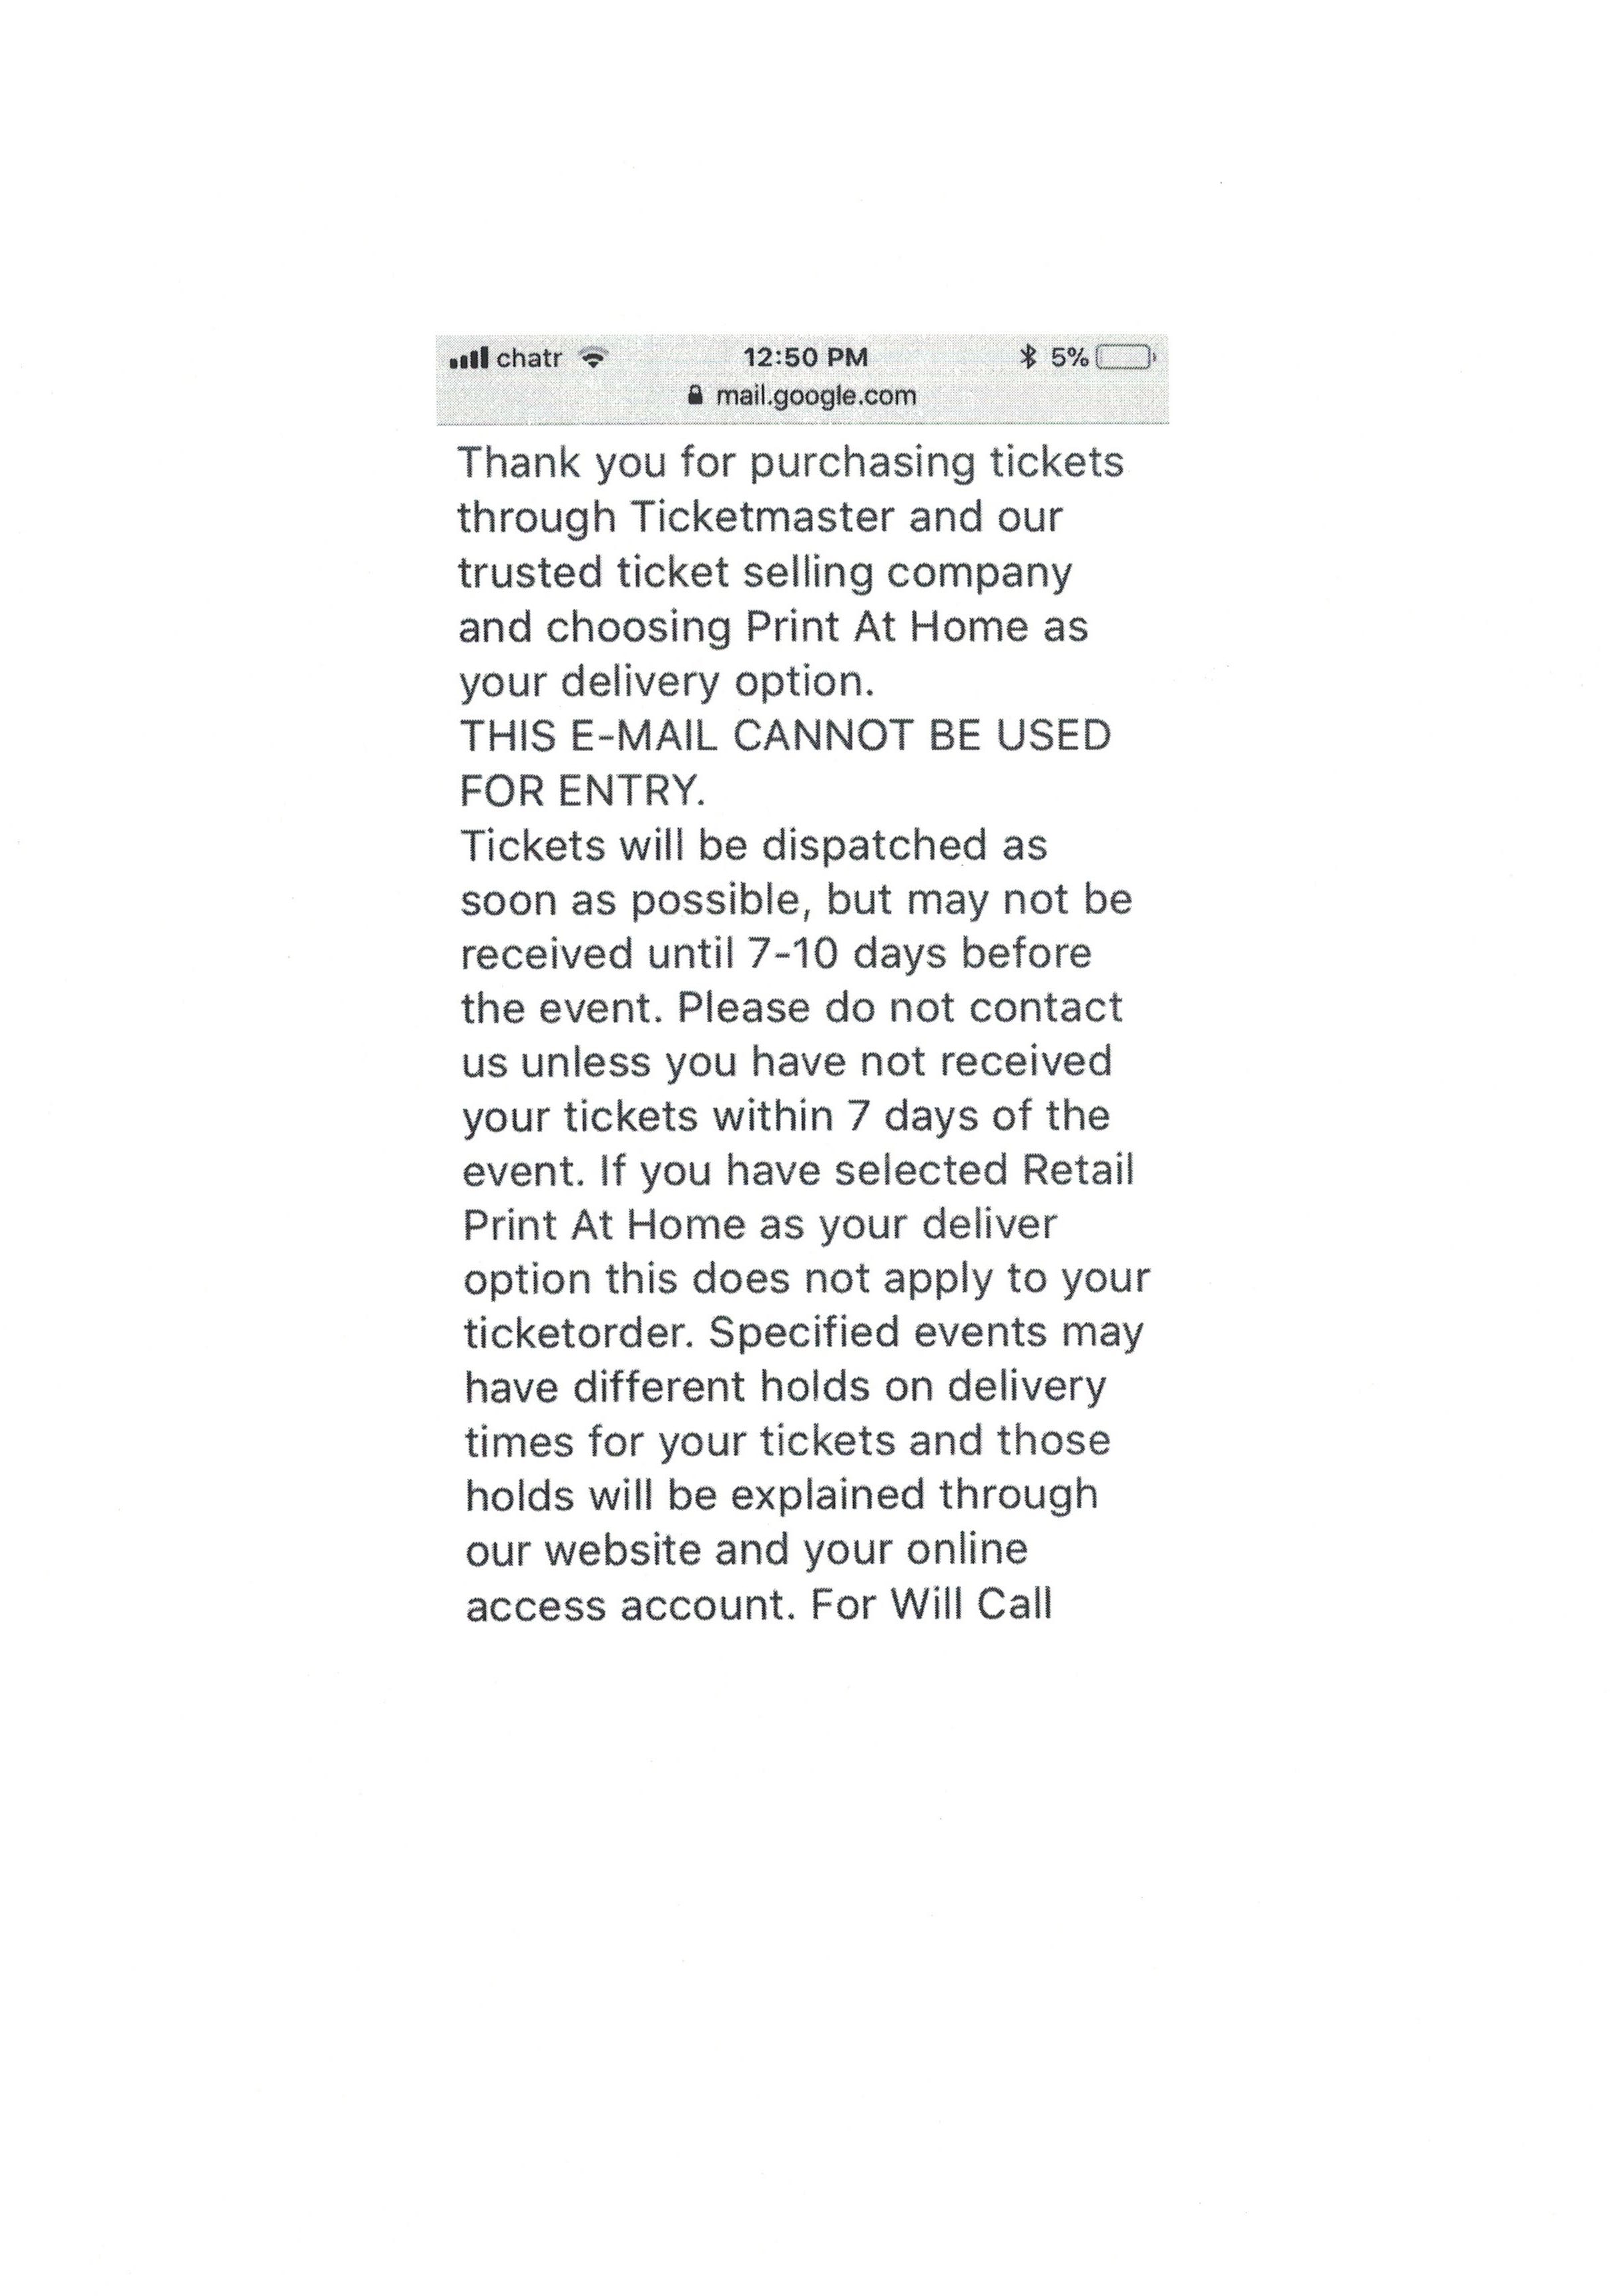 Ticket purchase proof screenshot Pg 1